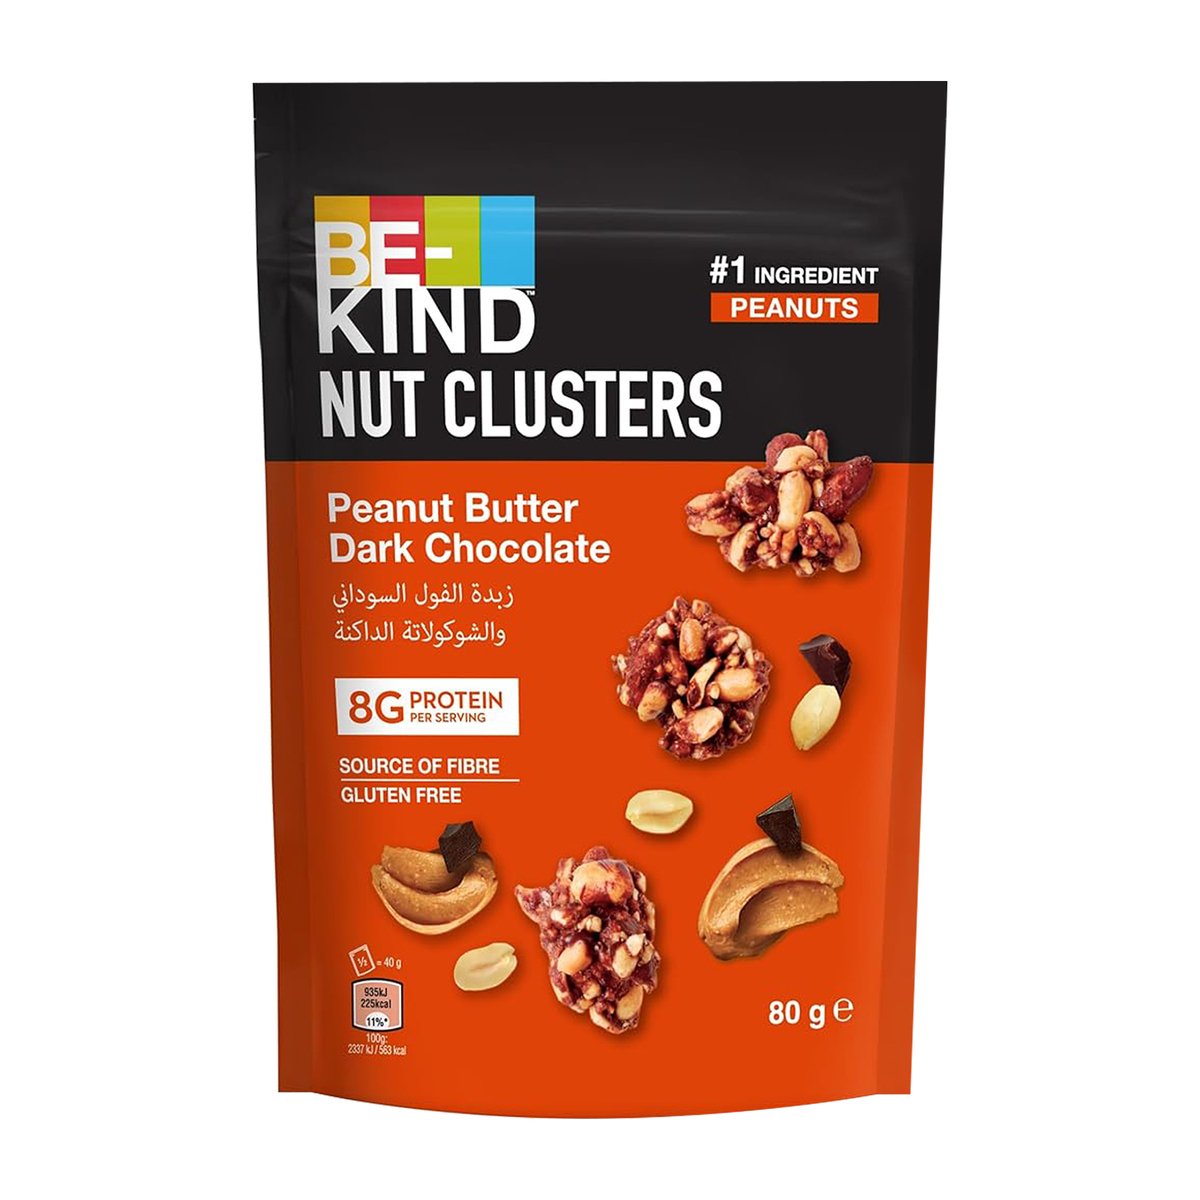 Be-Kind Peanut Butter Dark Chocolate Nut Clusters 80 g